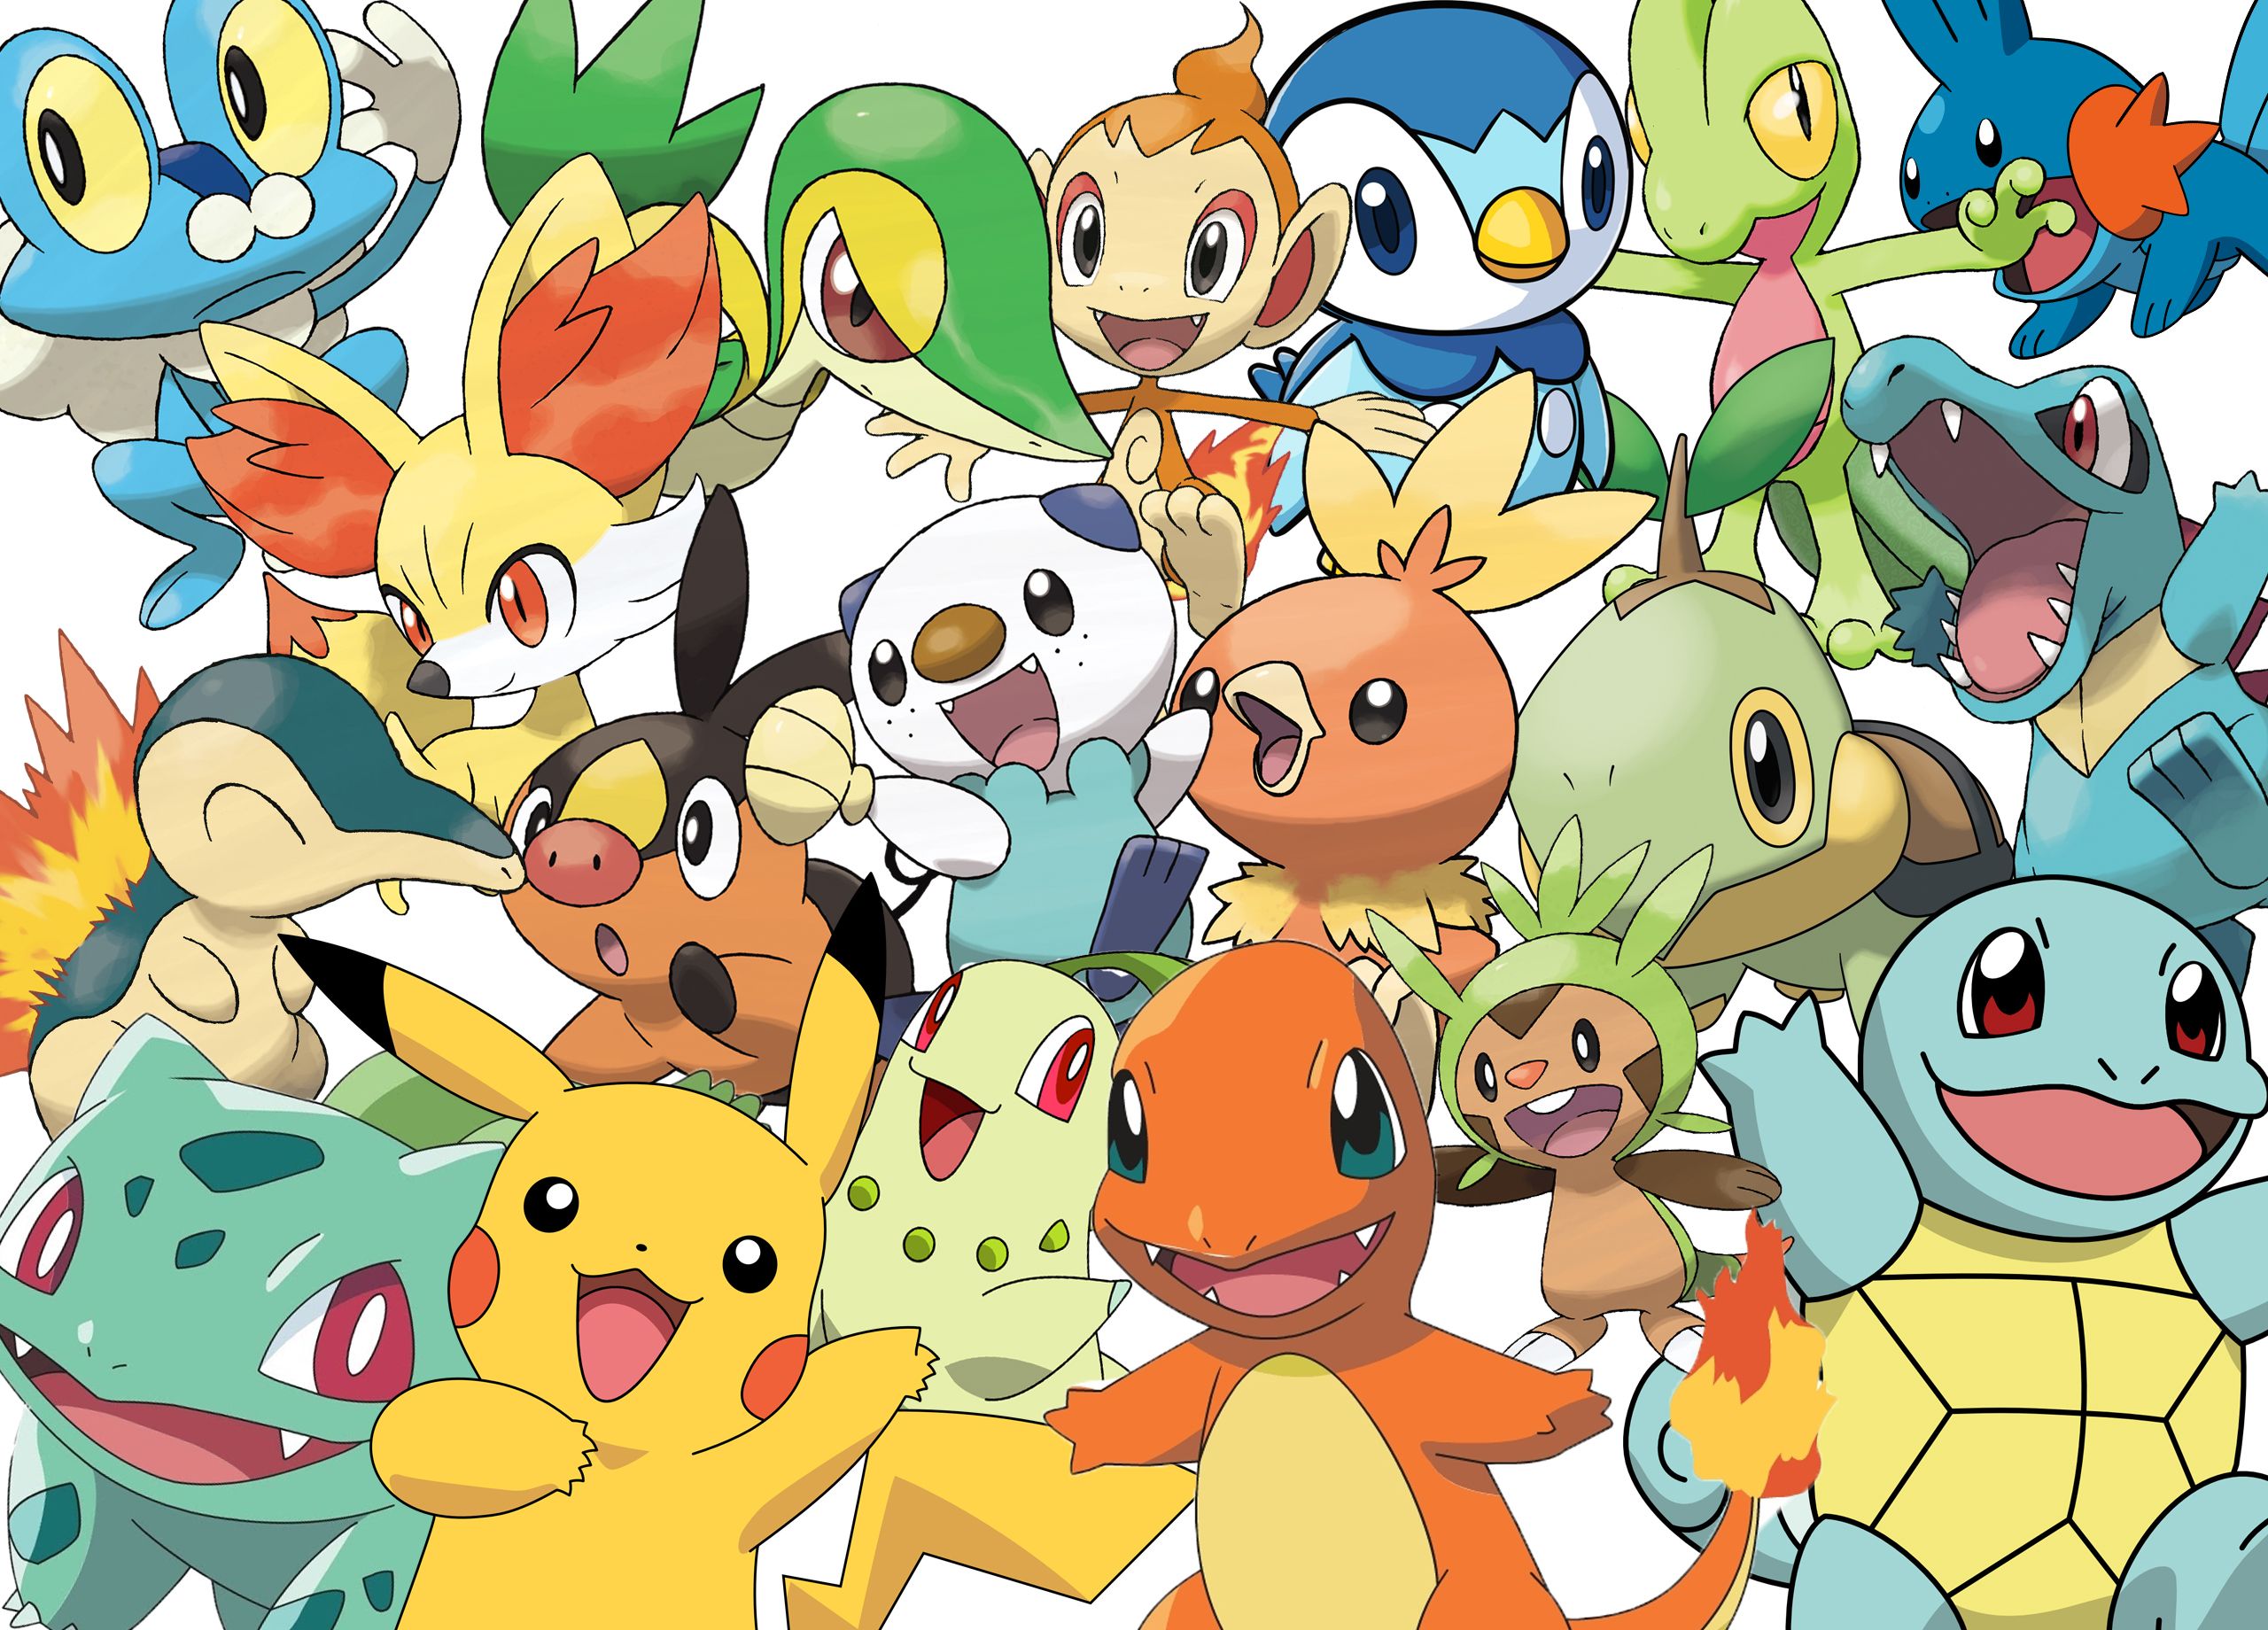 Pokemon Starters Ranked From Charmander To Turtwig And Beyond